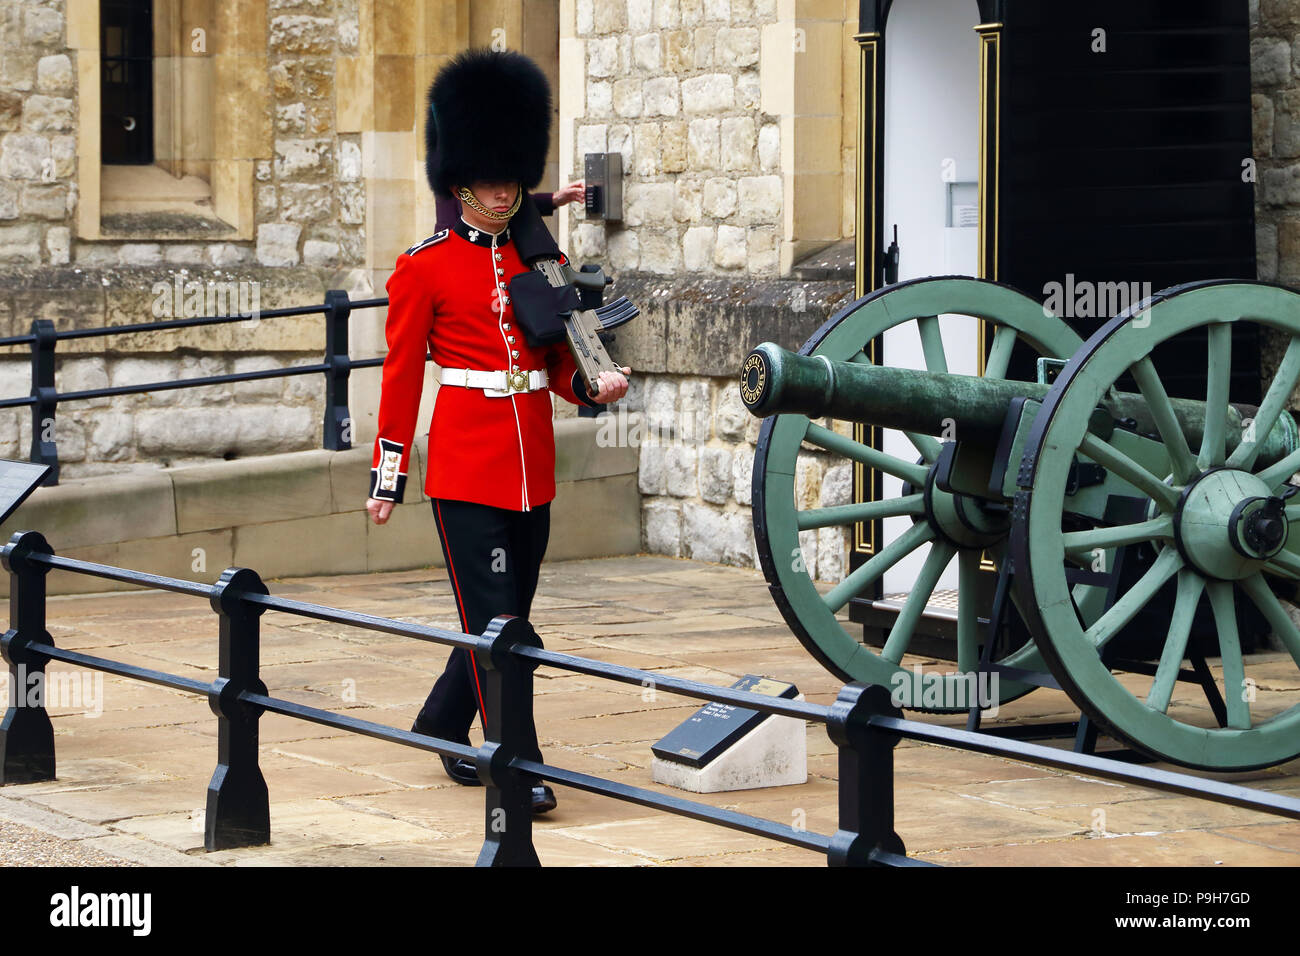 A member of the Queen's Guard marches and stands sentinal at the Tower of London in London, England. Stock Photo